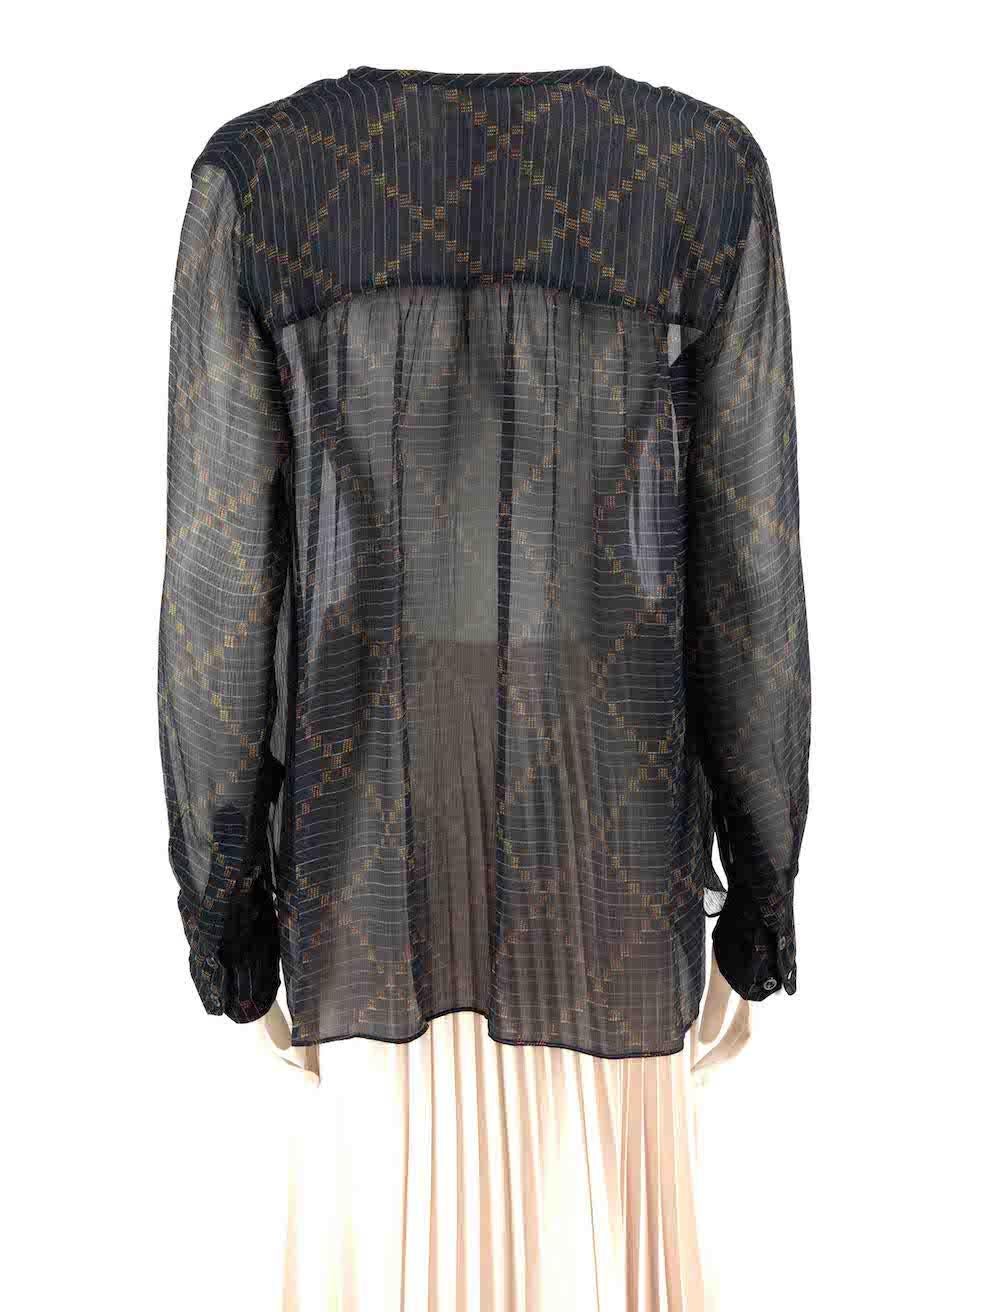 Isabel Marant Isabel Marant Etoile Navy Sheer Pinstripe Diamond Blouse Size S In Good Condition For Sale In London, GB